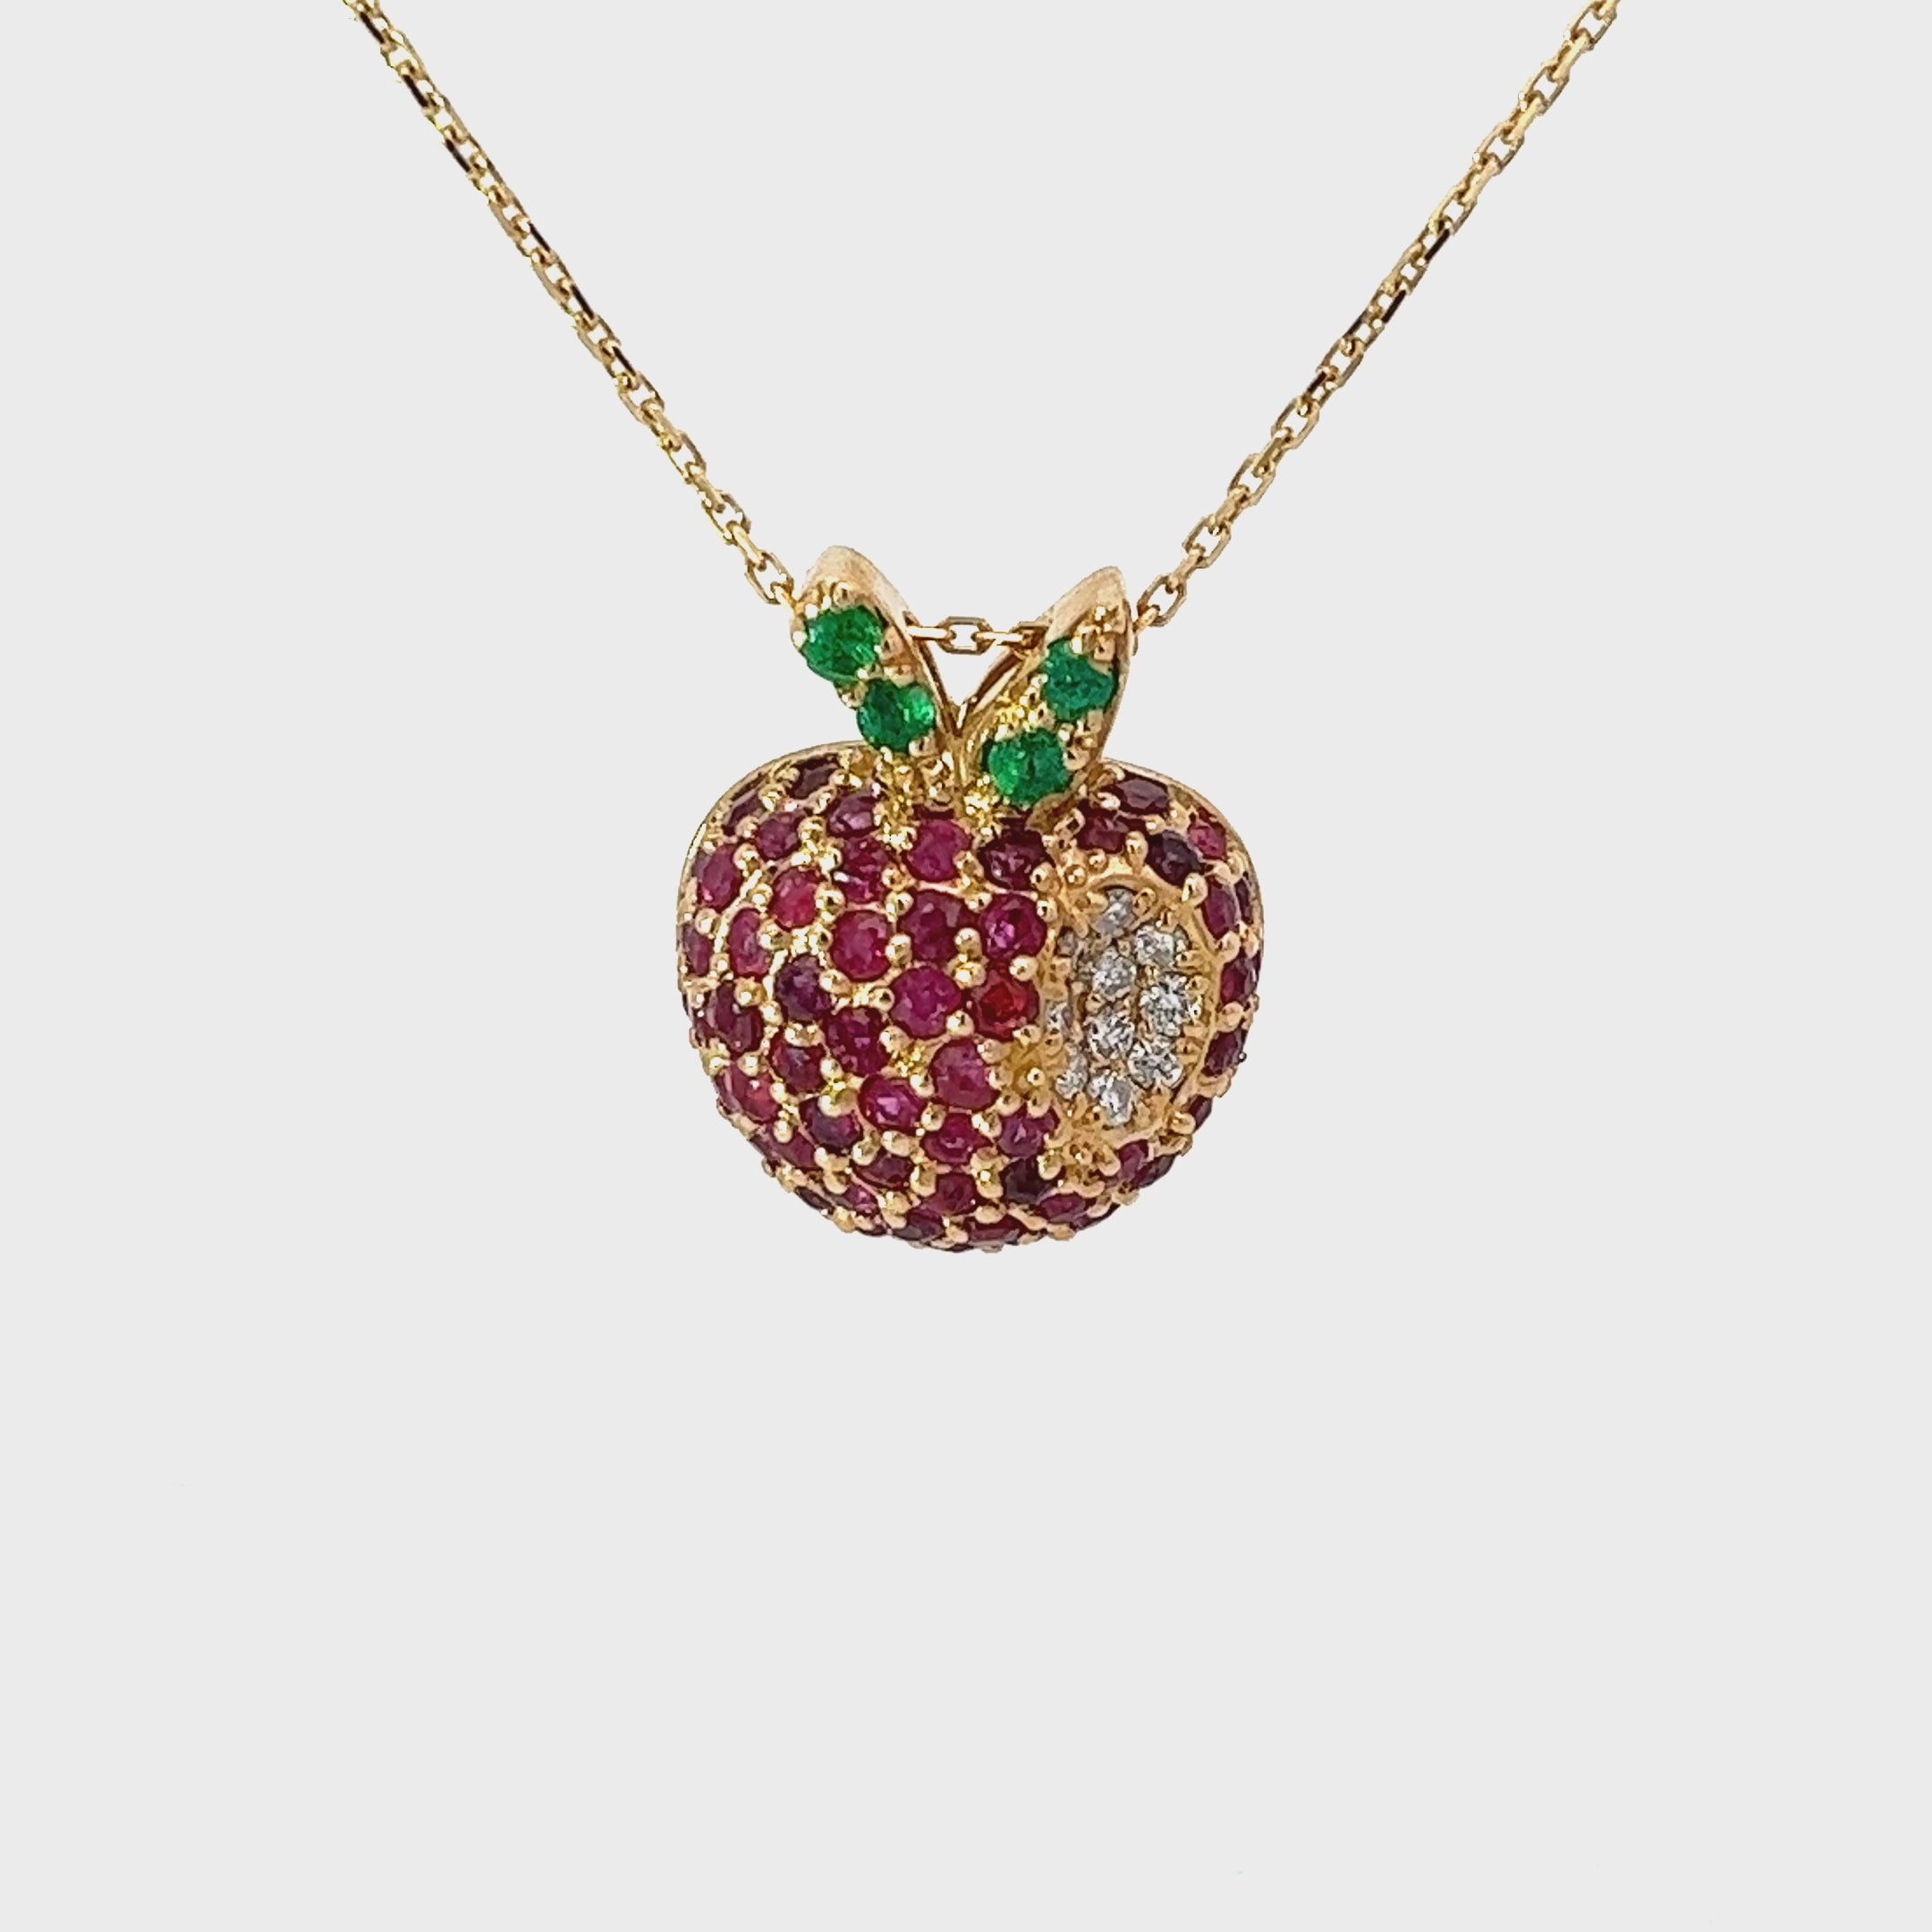 Ladies 14k Yellow Gold Diamond, Ruby, and Emerald Apple Necklace